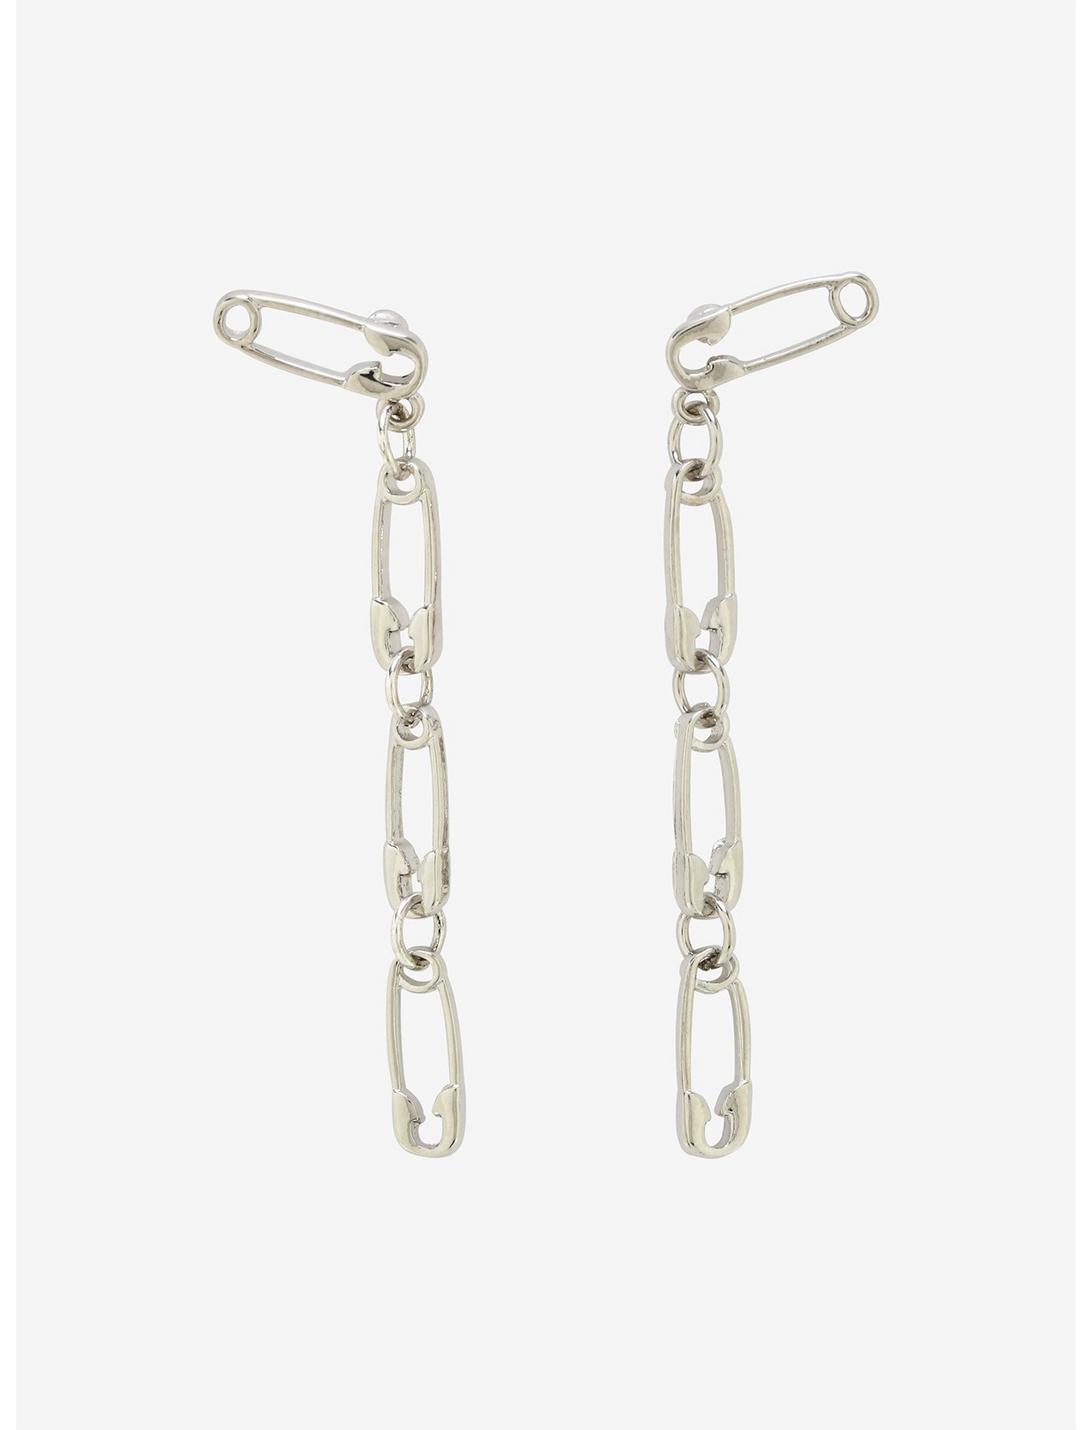 Safety Pin Drop Earrings, , hi-res